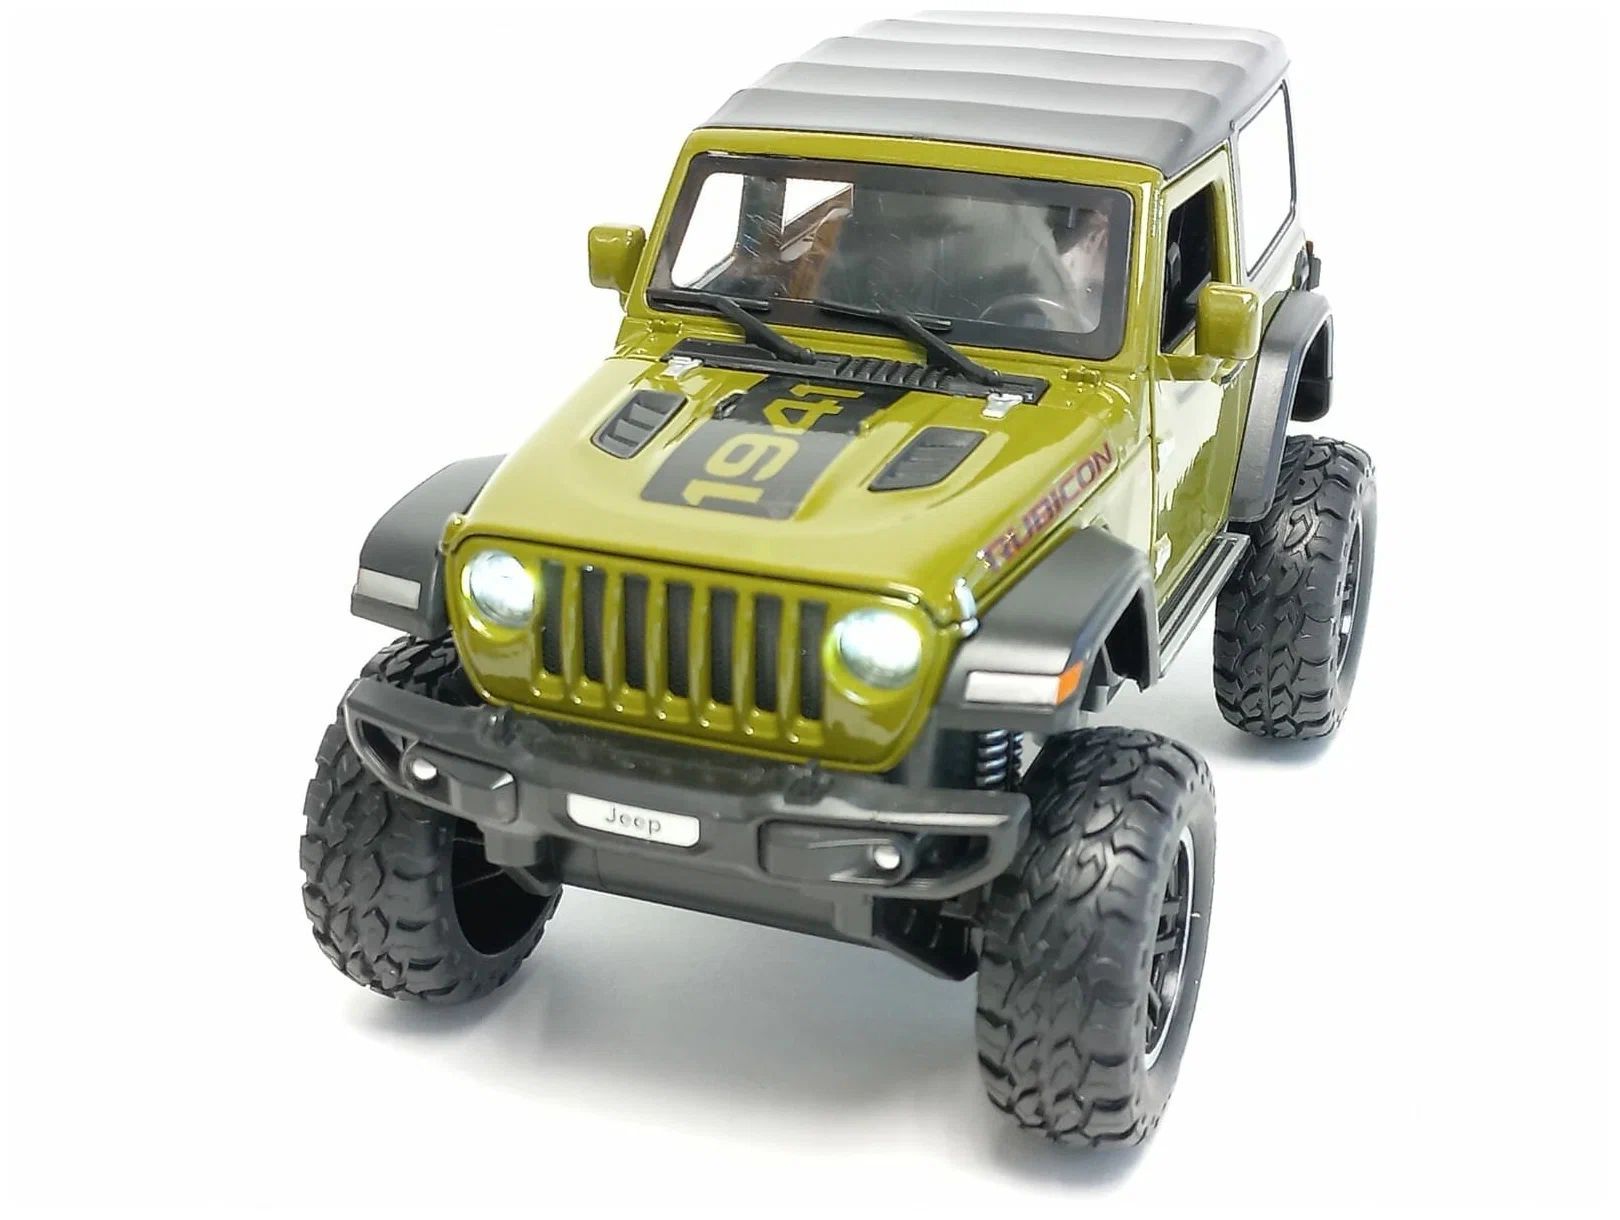 Машинка металлическая Элемент Jeep wrangler 1:24 alloy diecast jeeps wrangler vehicles off road climbing car toys for children desert buggy inertial car model toy gifts for boys